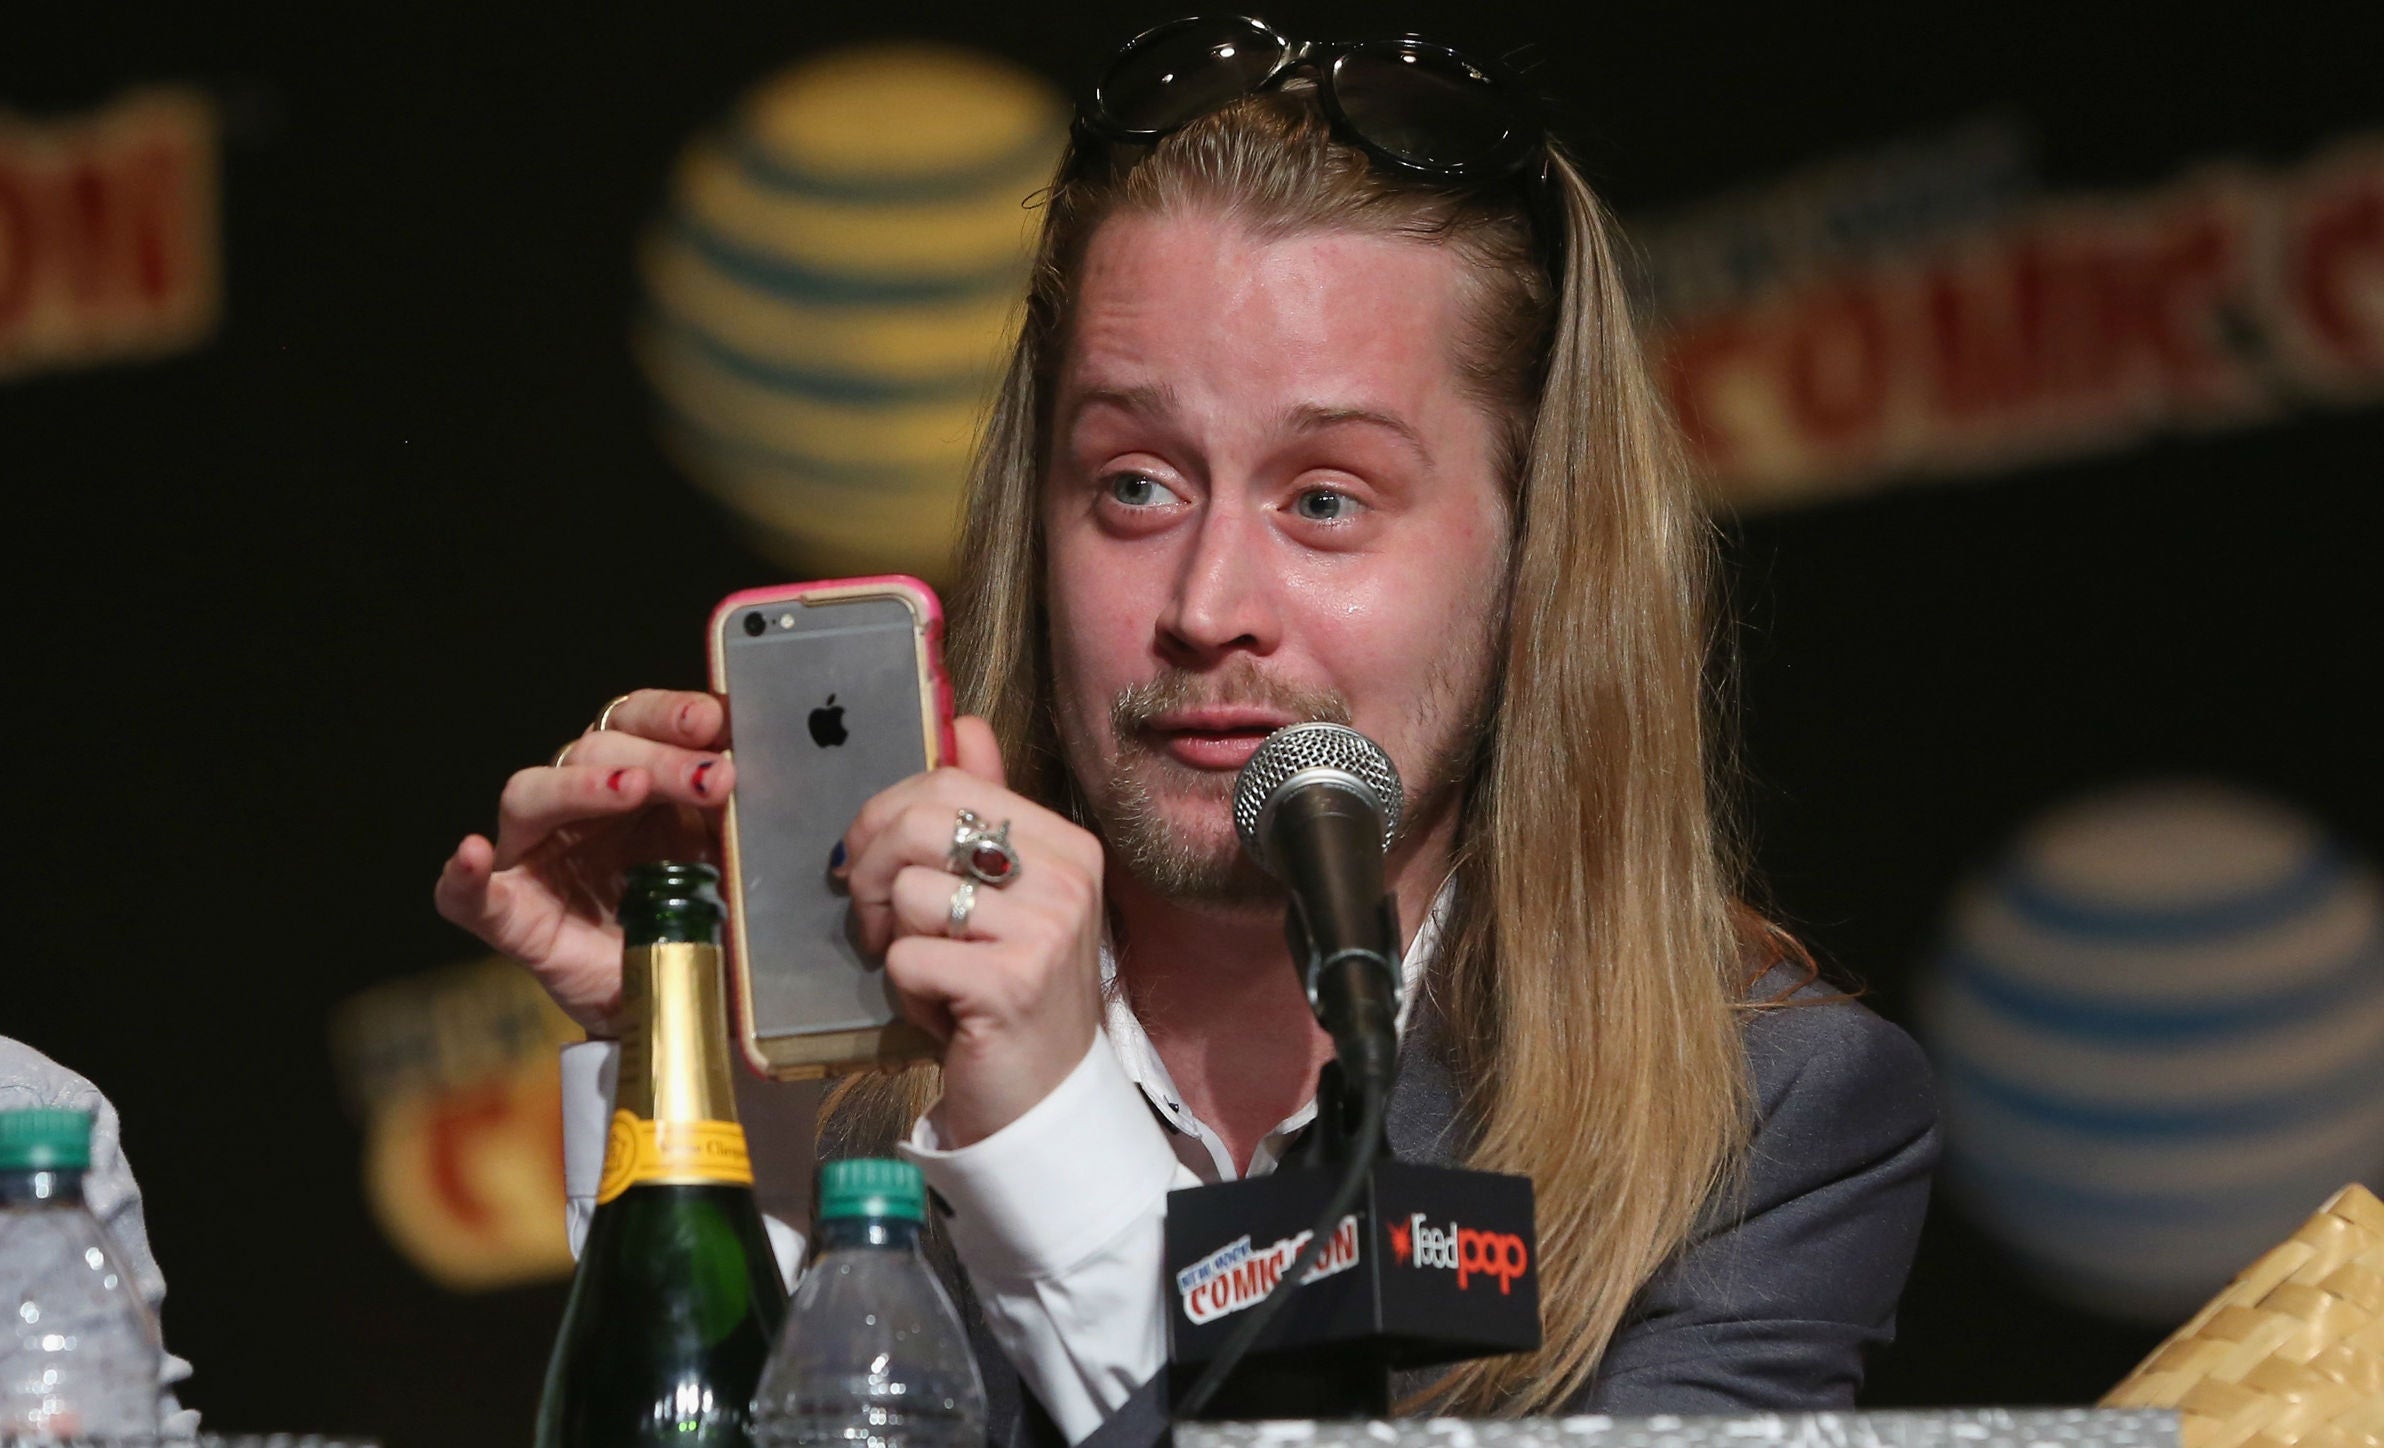 Macaulay Culkin has dropped off the radar in recent years and maintained a low profile